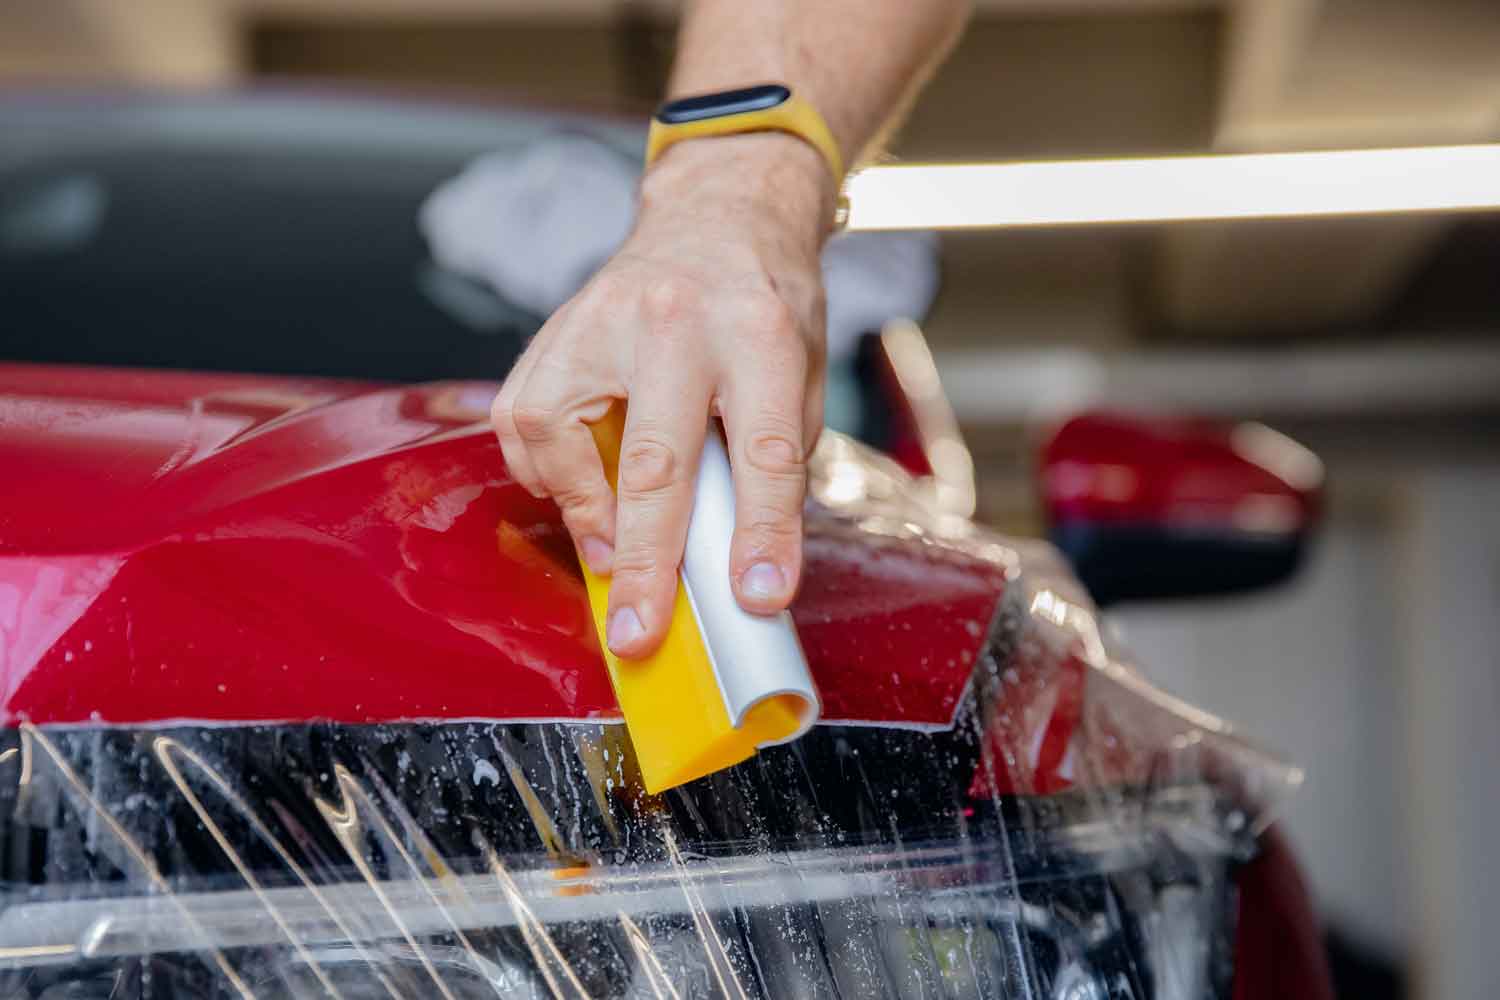 Technician applying clear protection film to the hood of a red car using a yellow squeegee